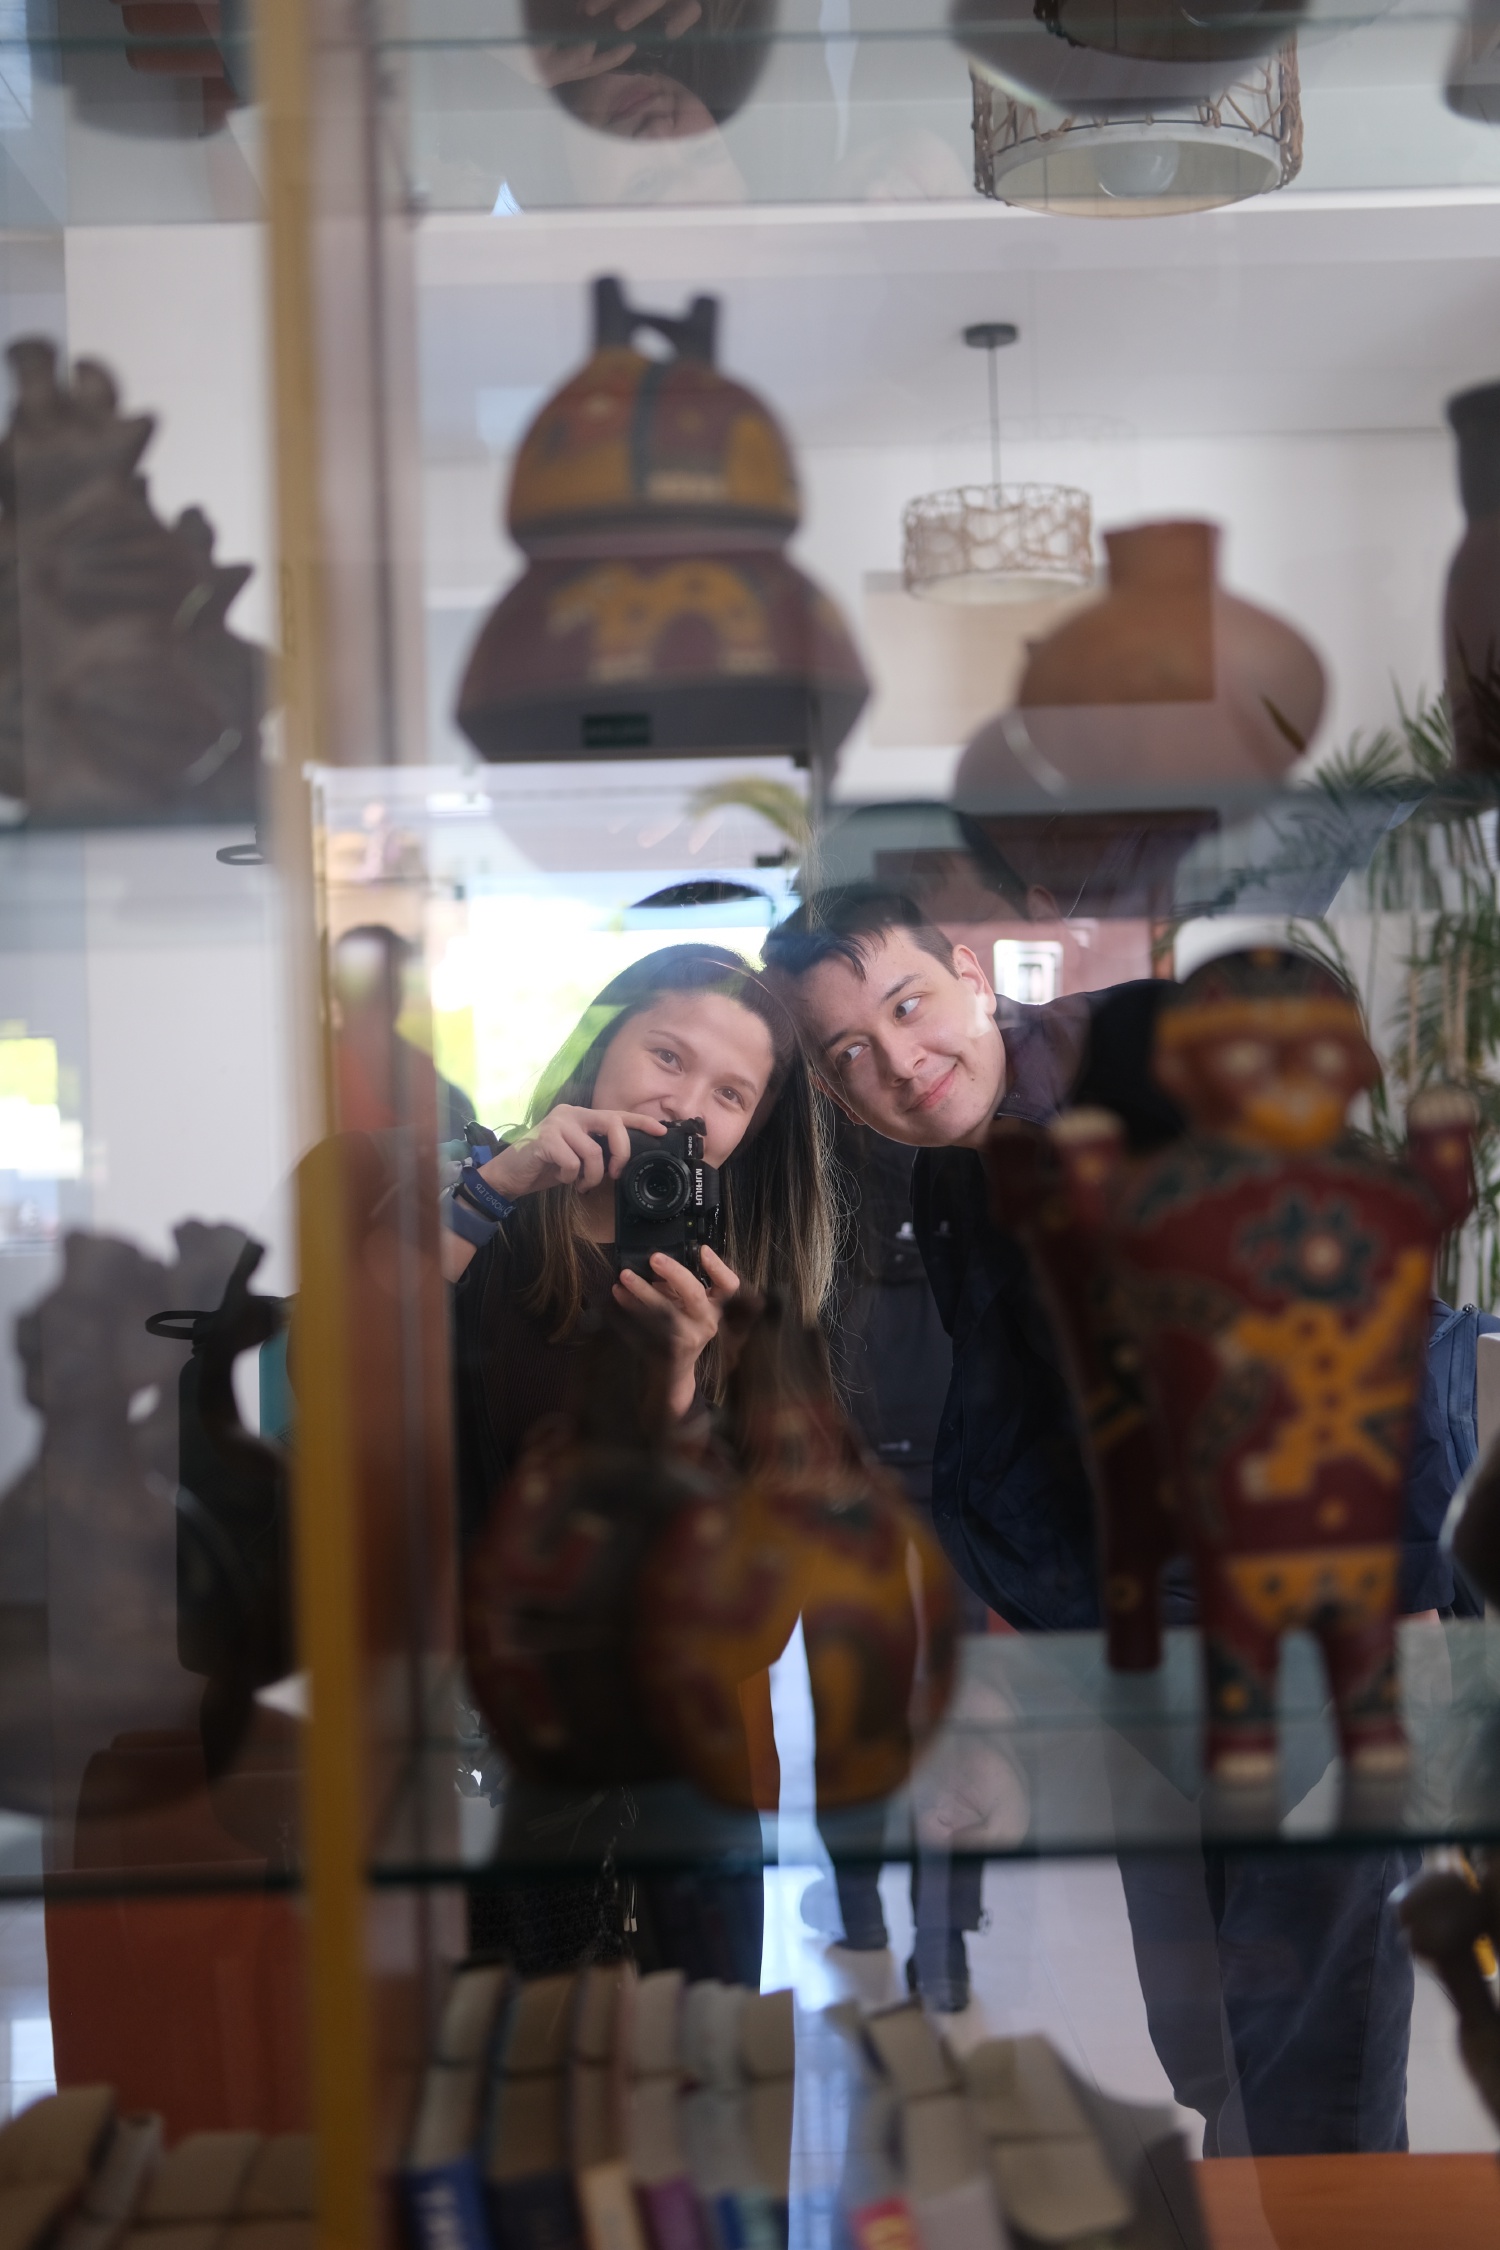 Taking a silly photo at our first stop! In the photo are samples of the amazing relics that Peru has a lot of! So preserved!